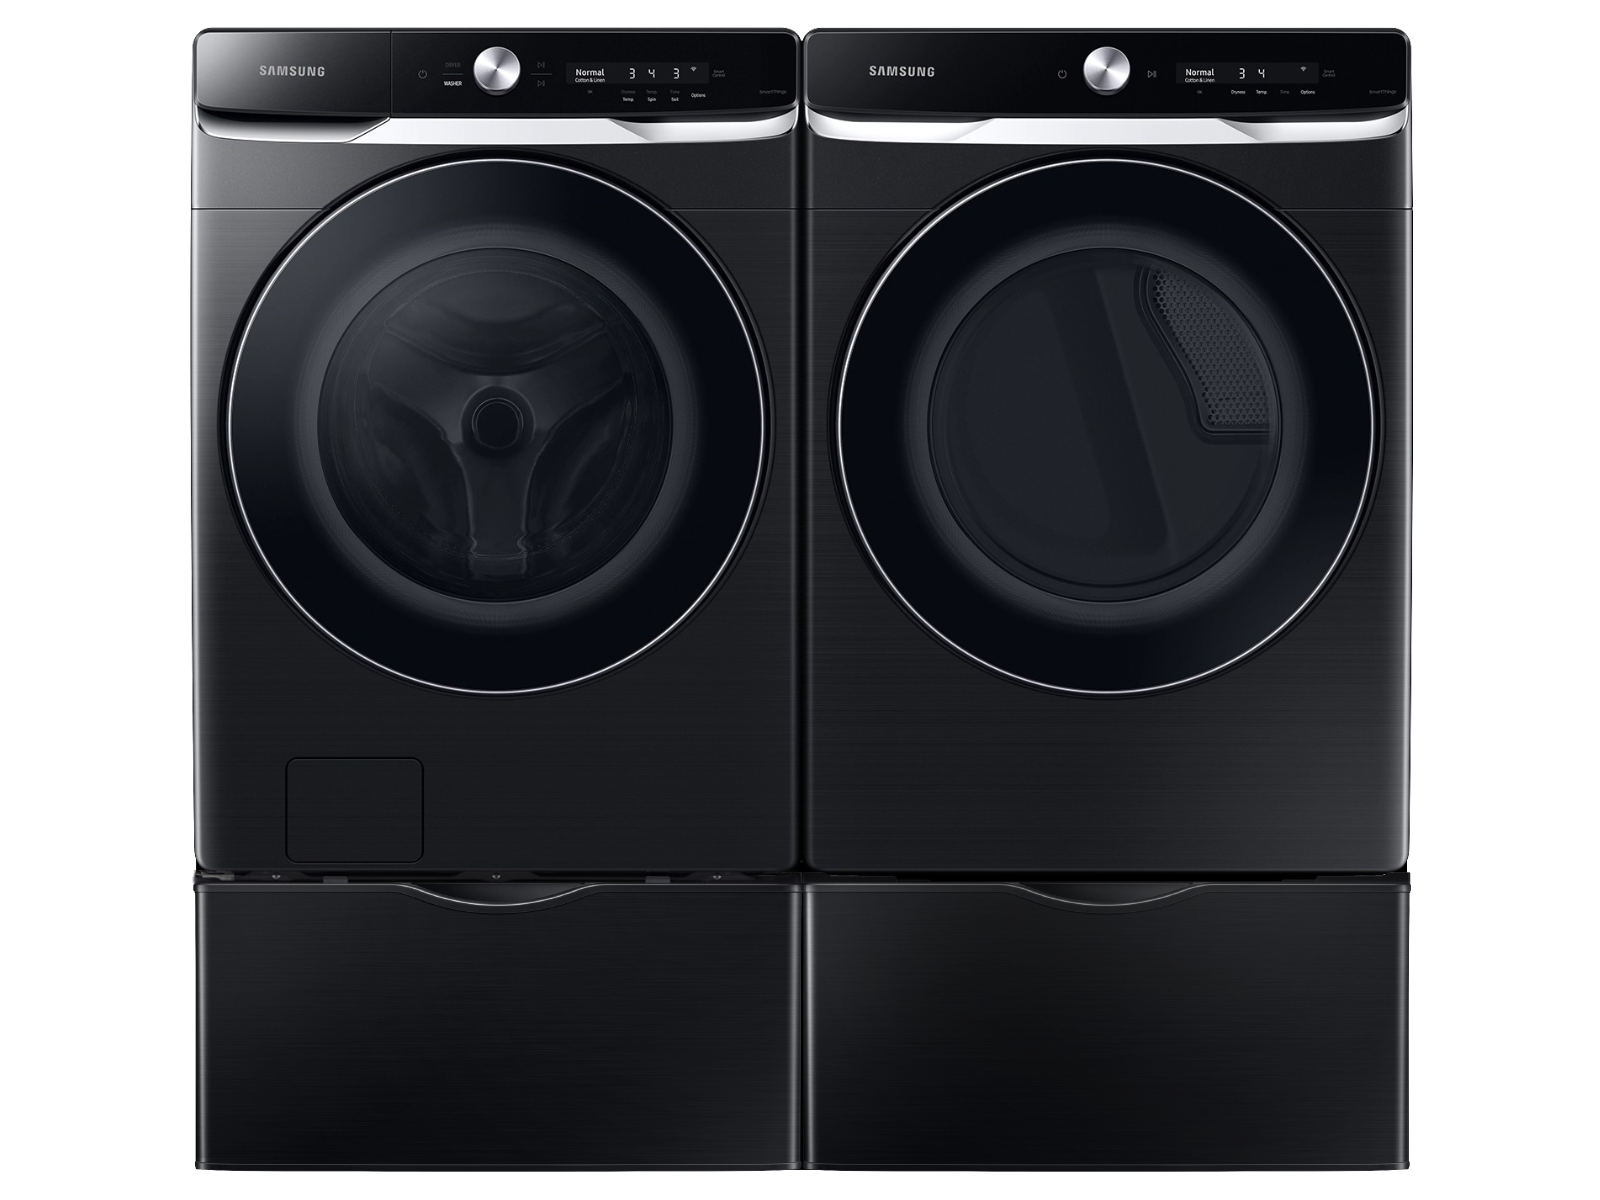 Photos - Tumble Dryer Samsung Front Load Washer with OptiWash™ and CleanGuard™, Dryer with Super 